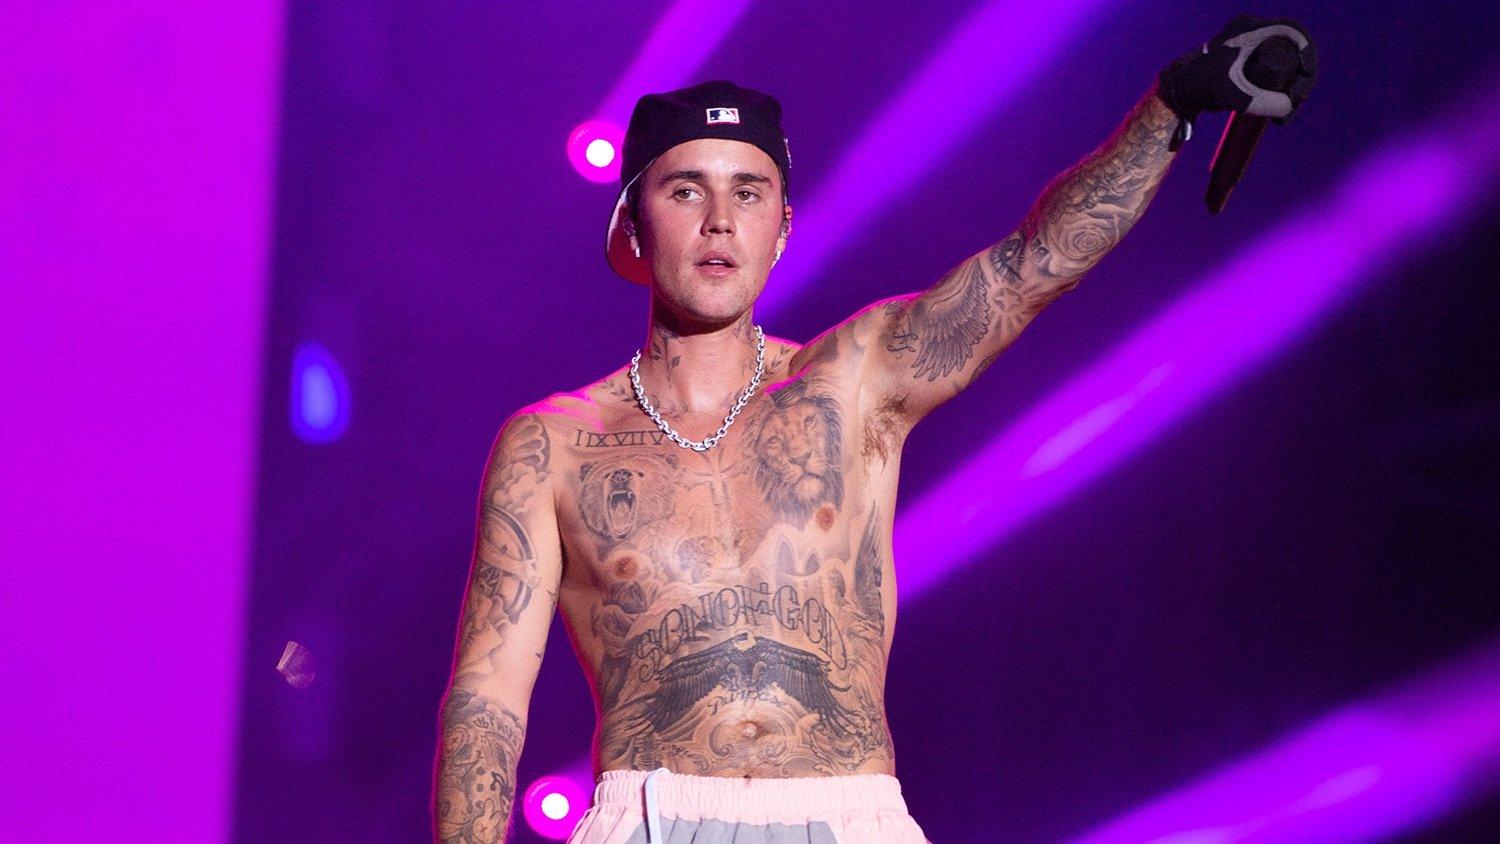 Justin Bieber's Biggest Hits: 12 Songs That Showcase His Pop